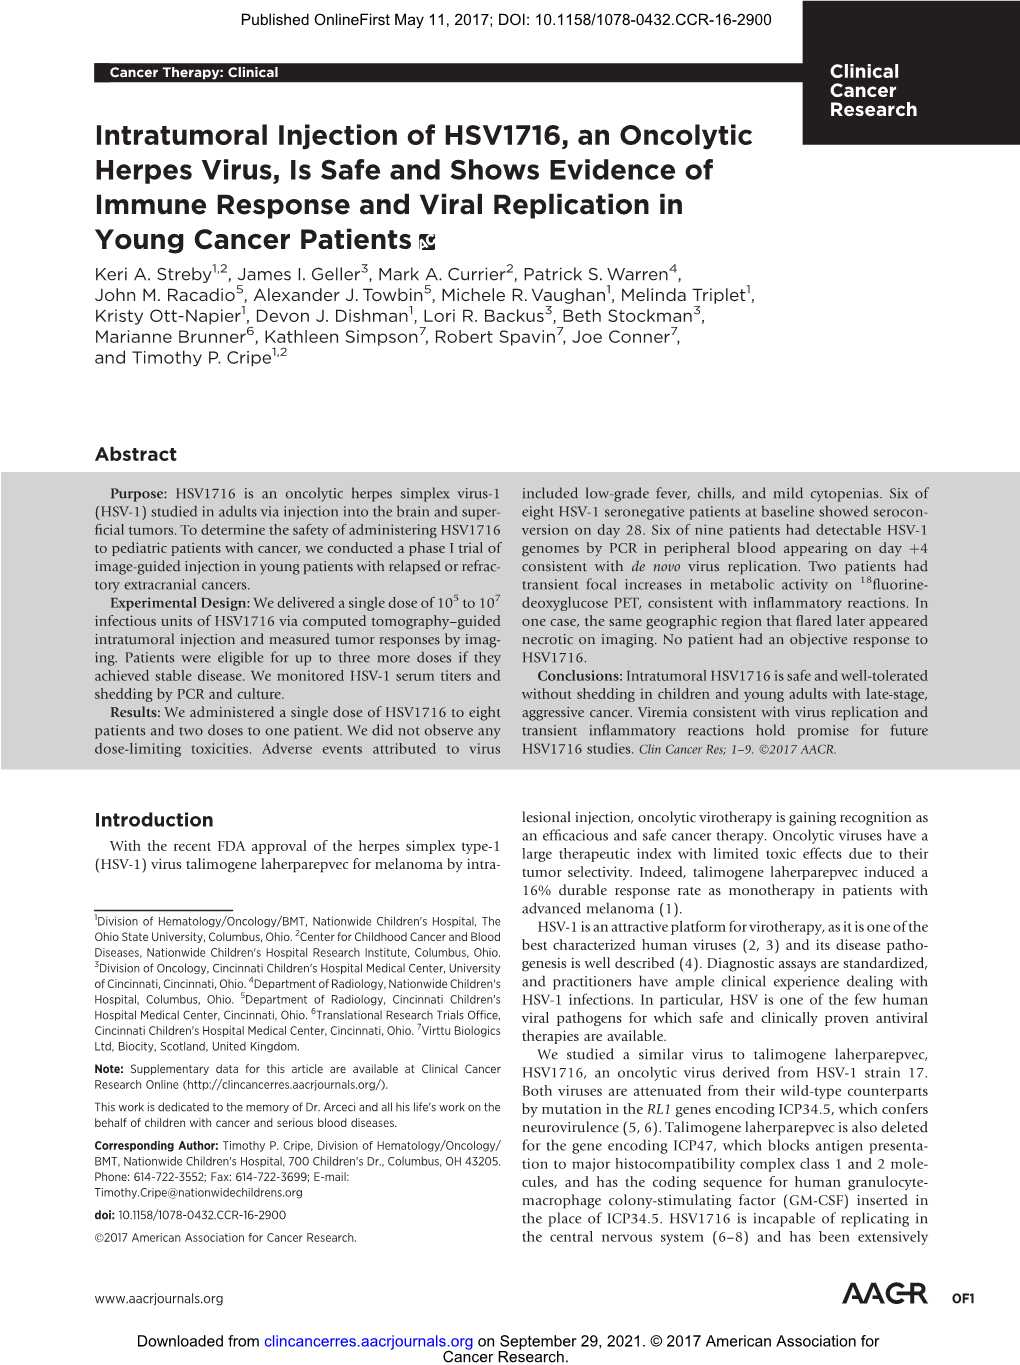 Intratumoral Injection of HSV1716, an Oncolytic Herpes Virus, Is Safe and Shows Evidence of Immune Response and Viral Replication in Young Cancer Patients Keri A